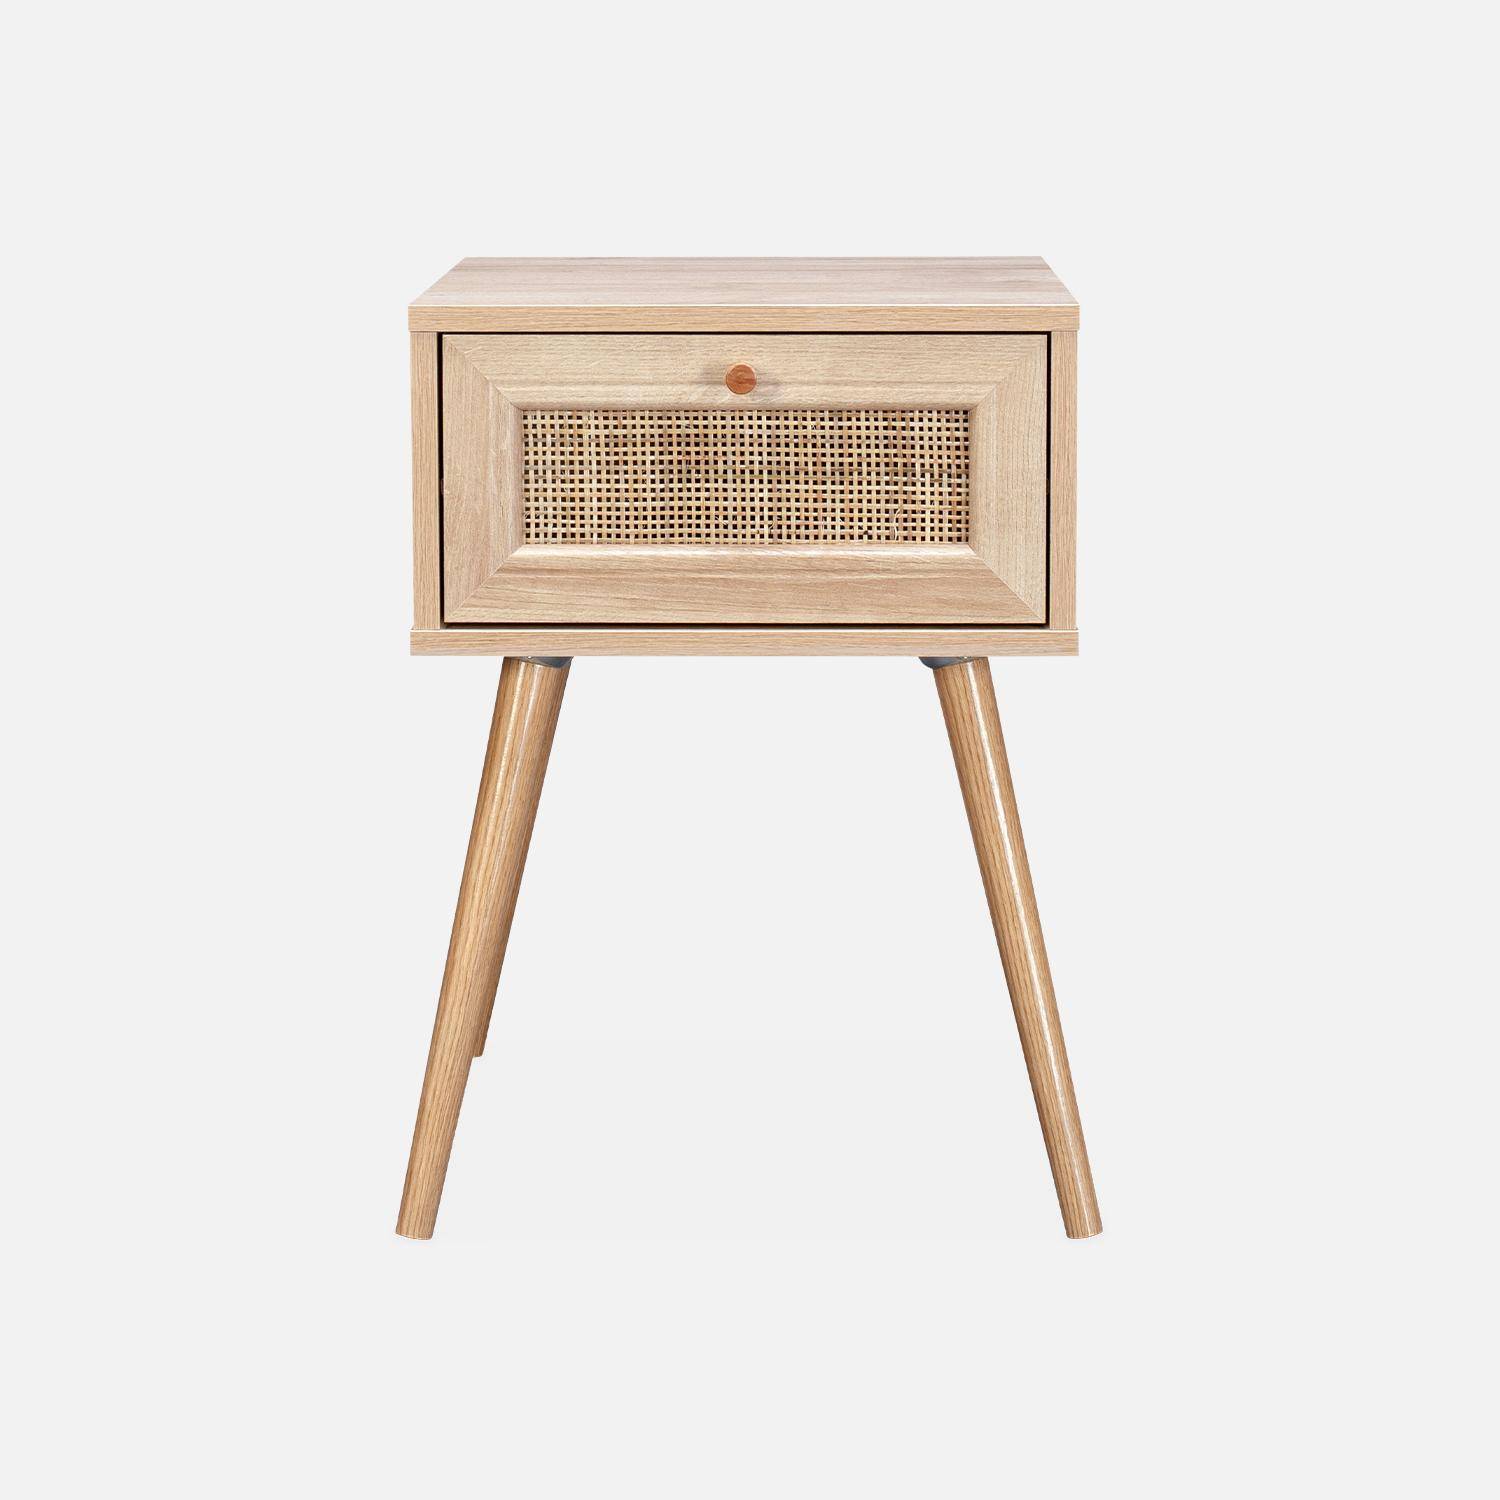 Woven rattan bedside table with drawer, 39x39x55.4cm - Boheme - Natural Wood colour,sweeek,Photo4